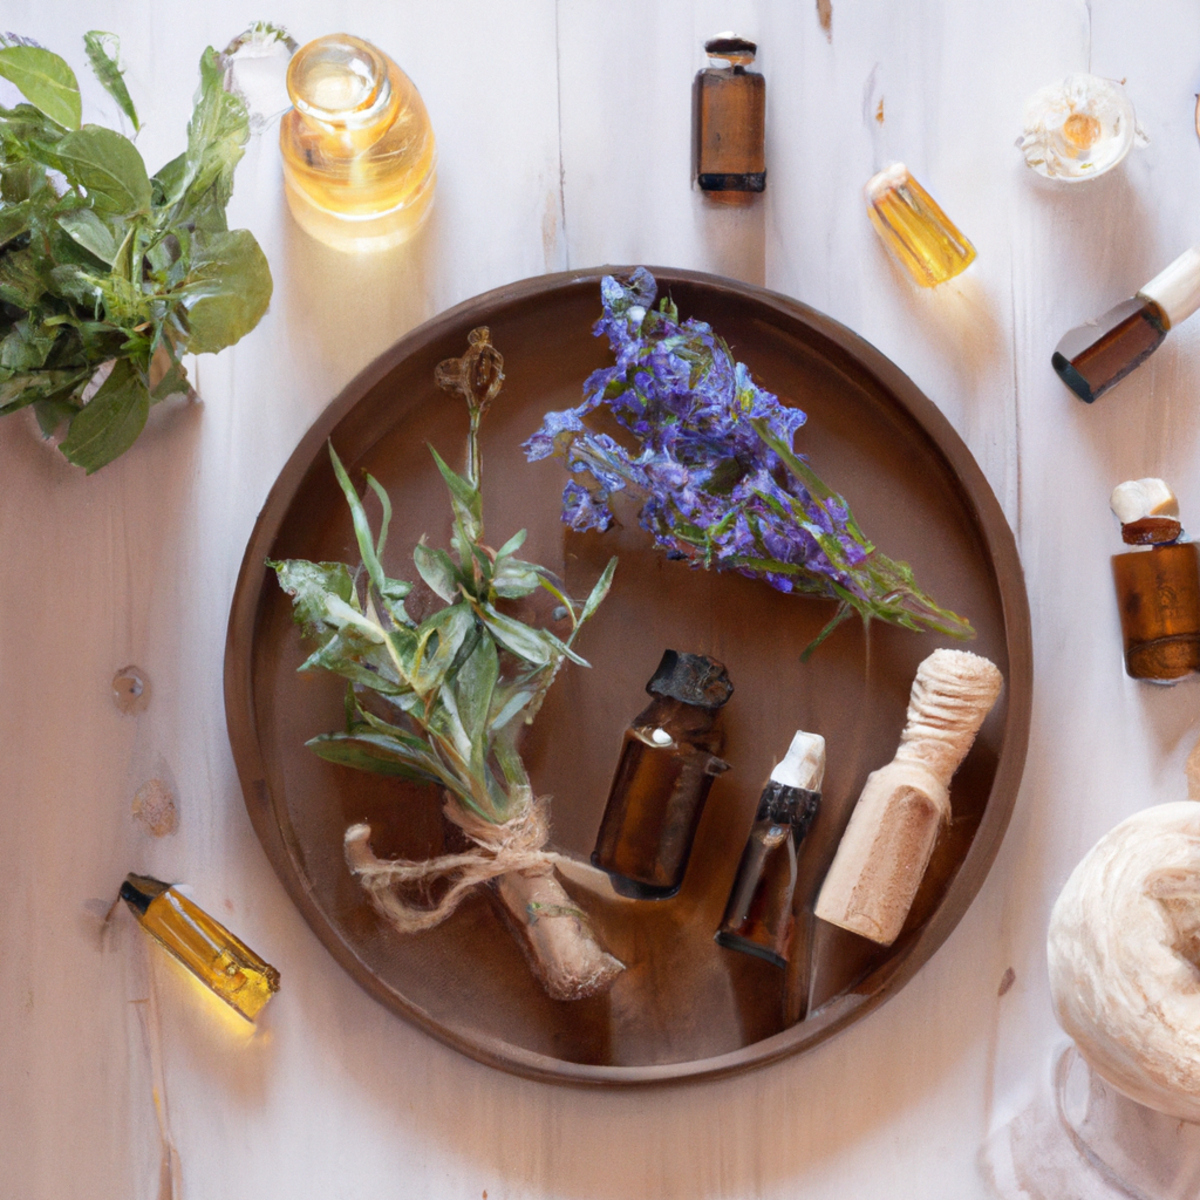 A serene scene of a wooden tray with essential oils, herbs, and a diffuser, creating a calming display -Stress Relief Exercises